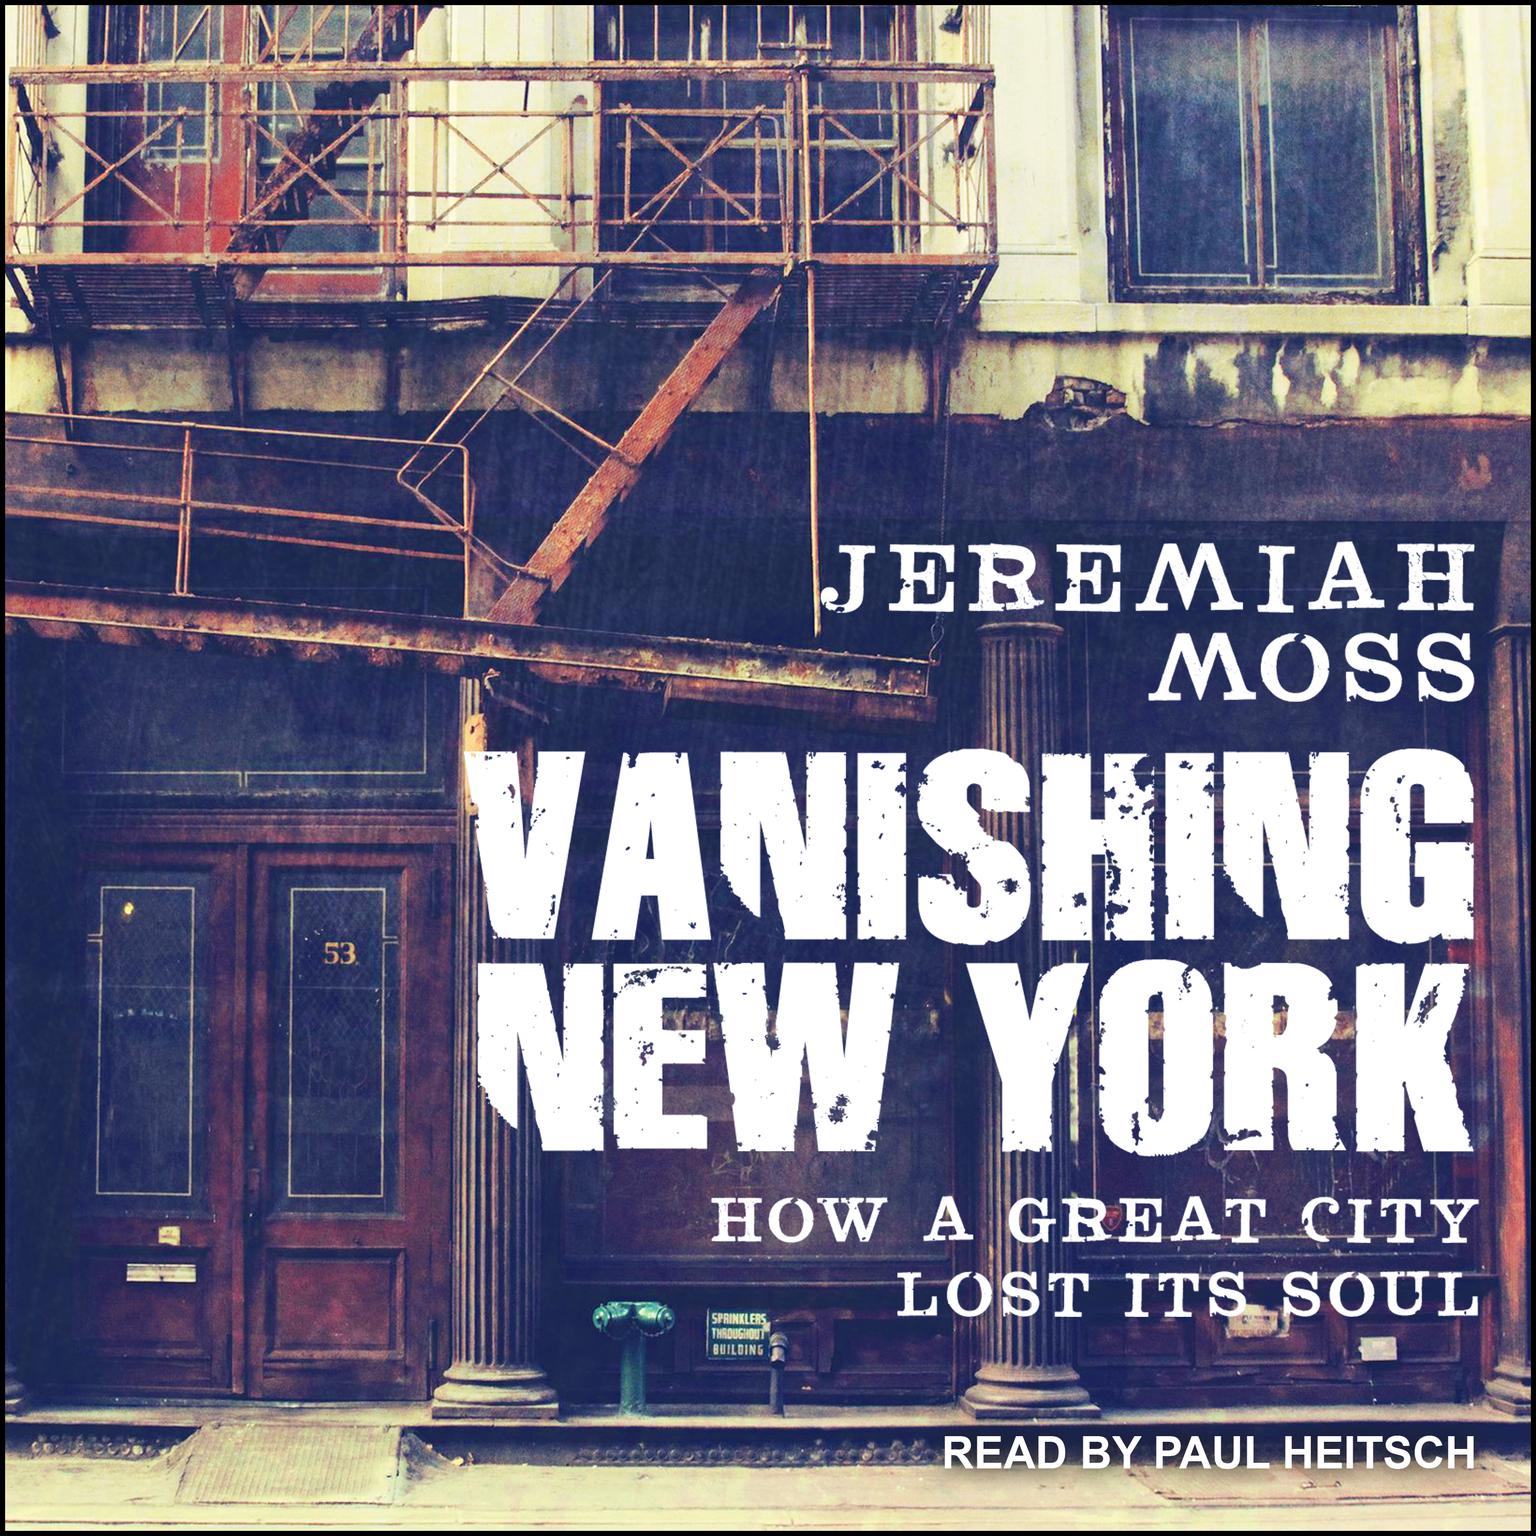 Vanishing New York: How a Great City Lost Its Soul Audiobook, by Jeremiah Moss